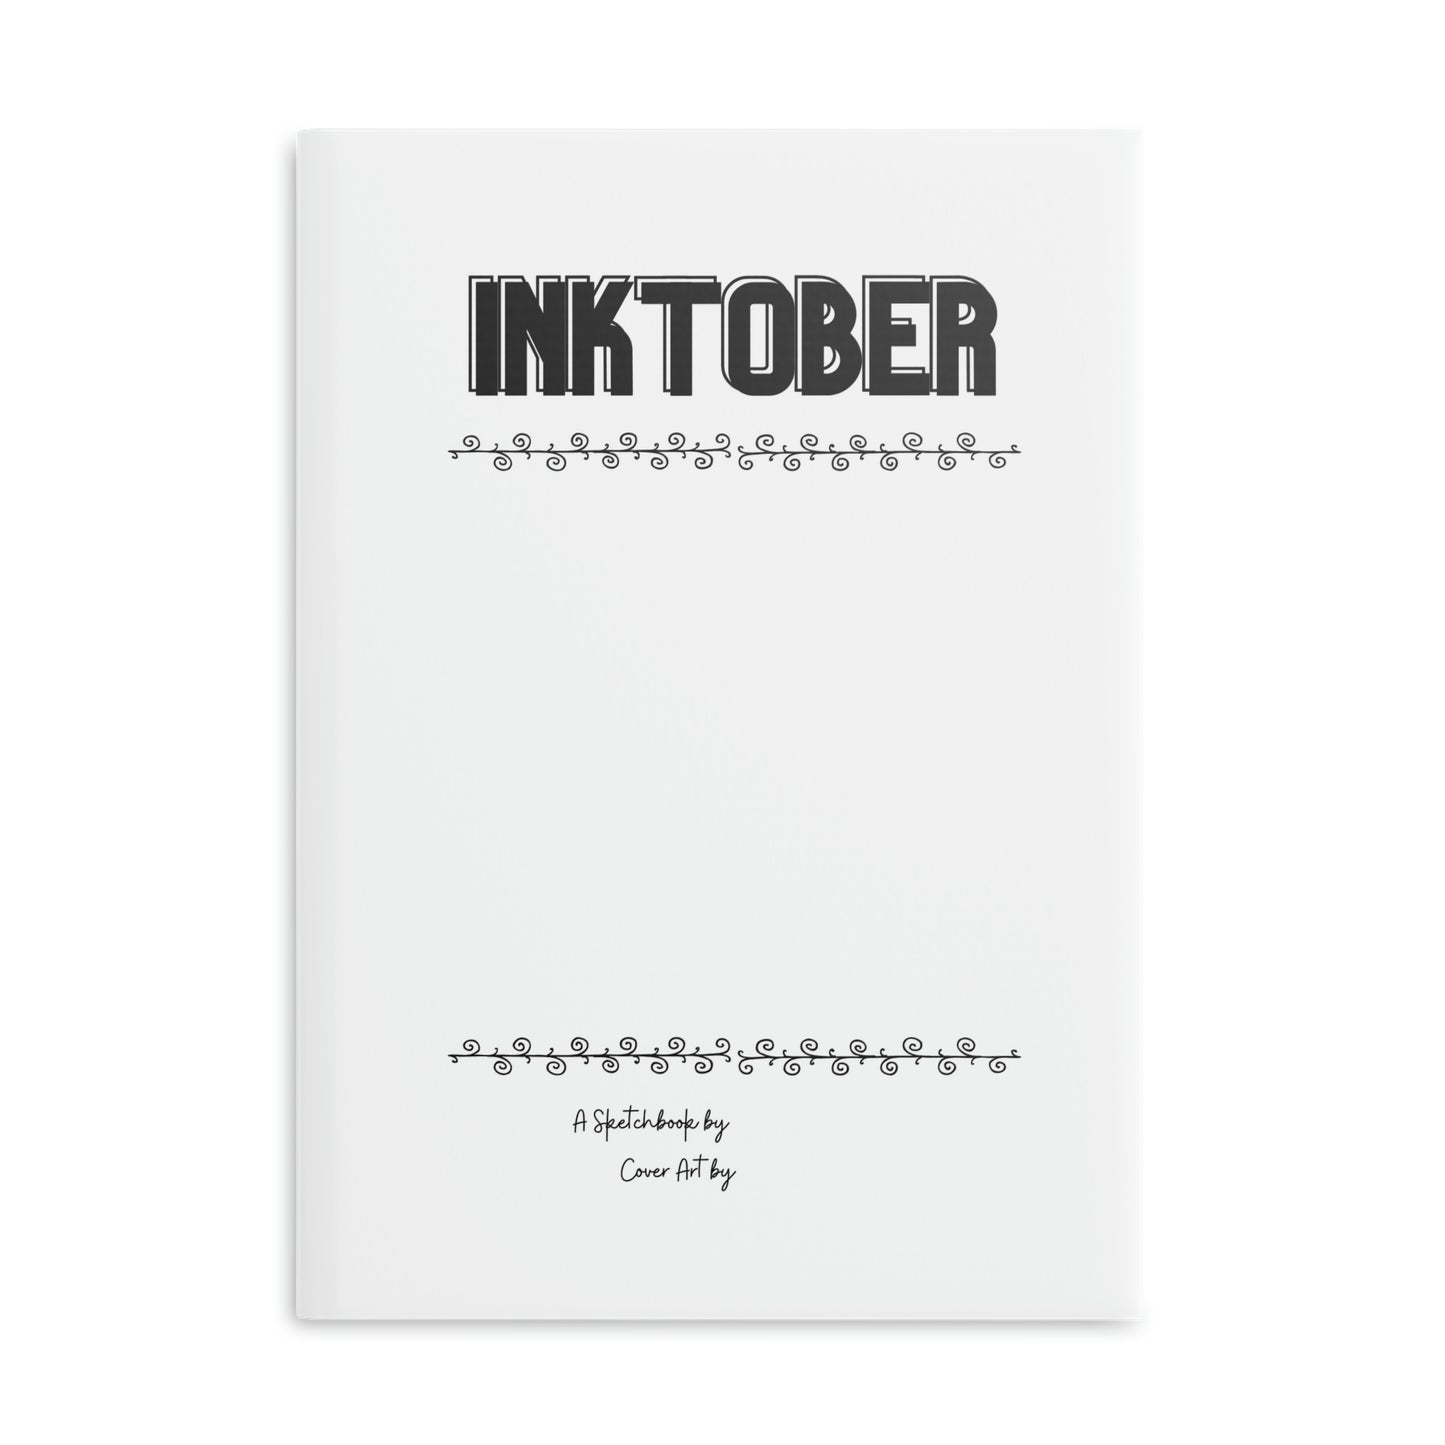 Inktober Hardcover Sketchbook with Puffy Covers